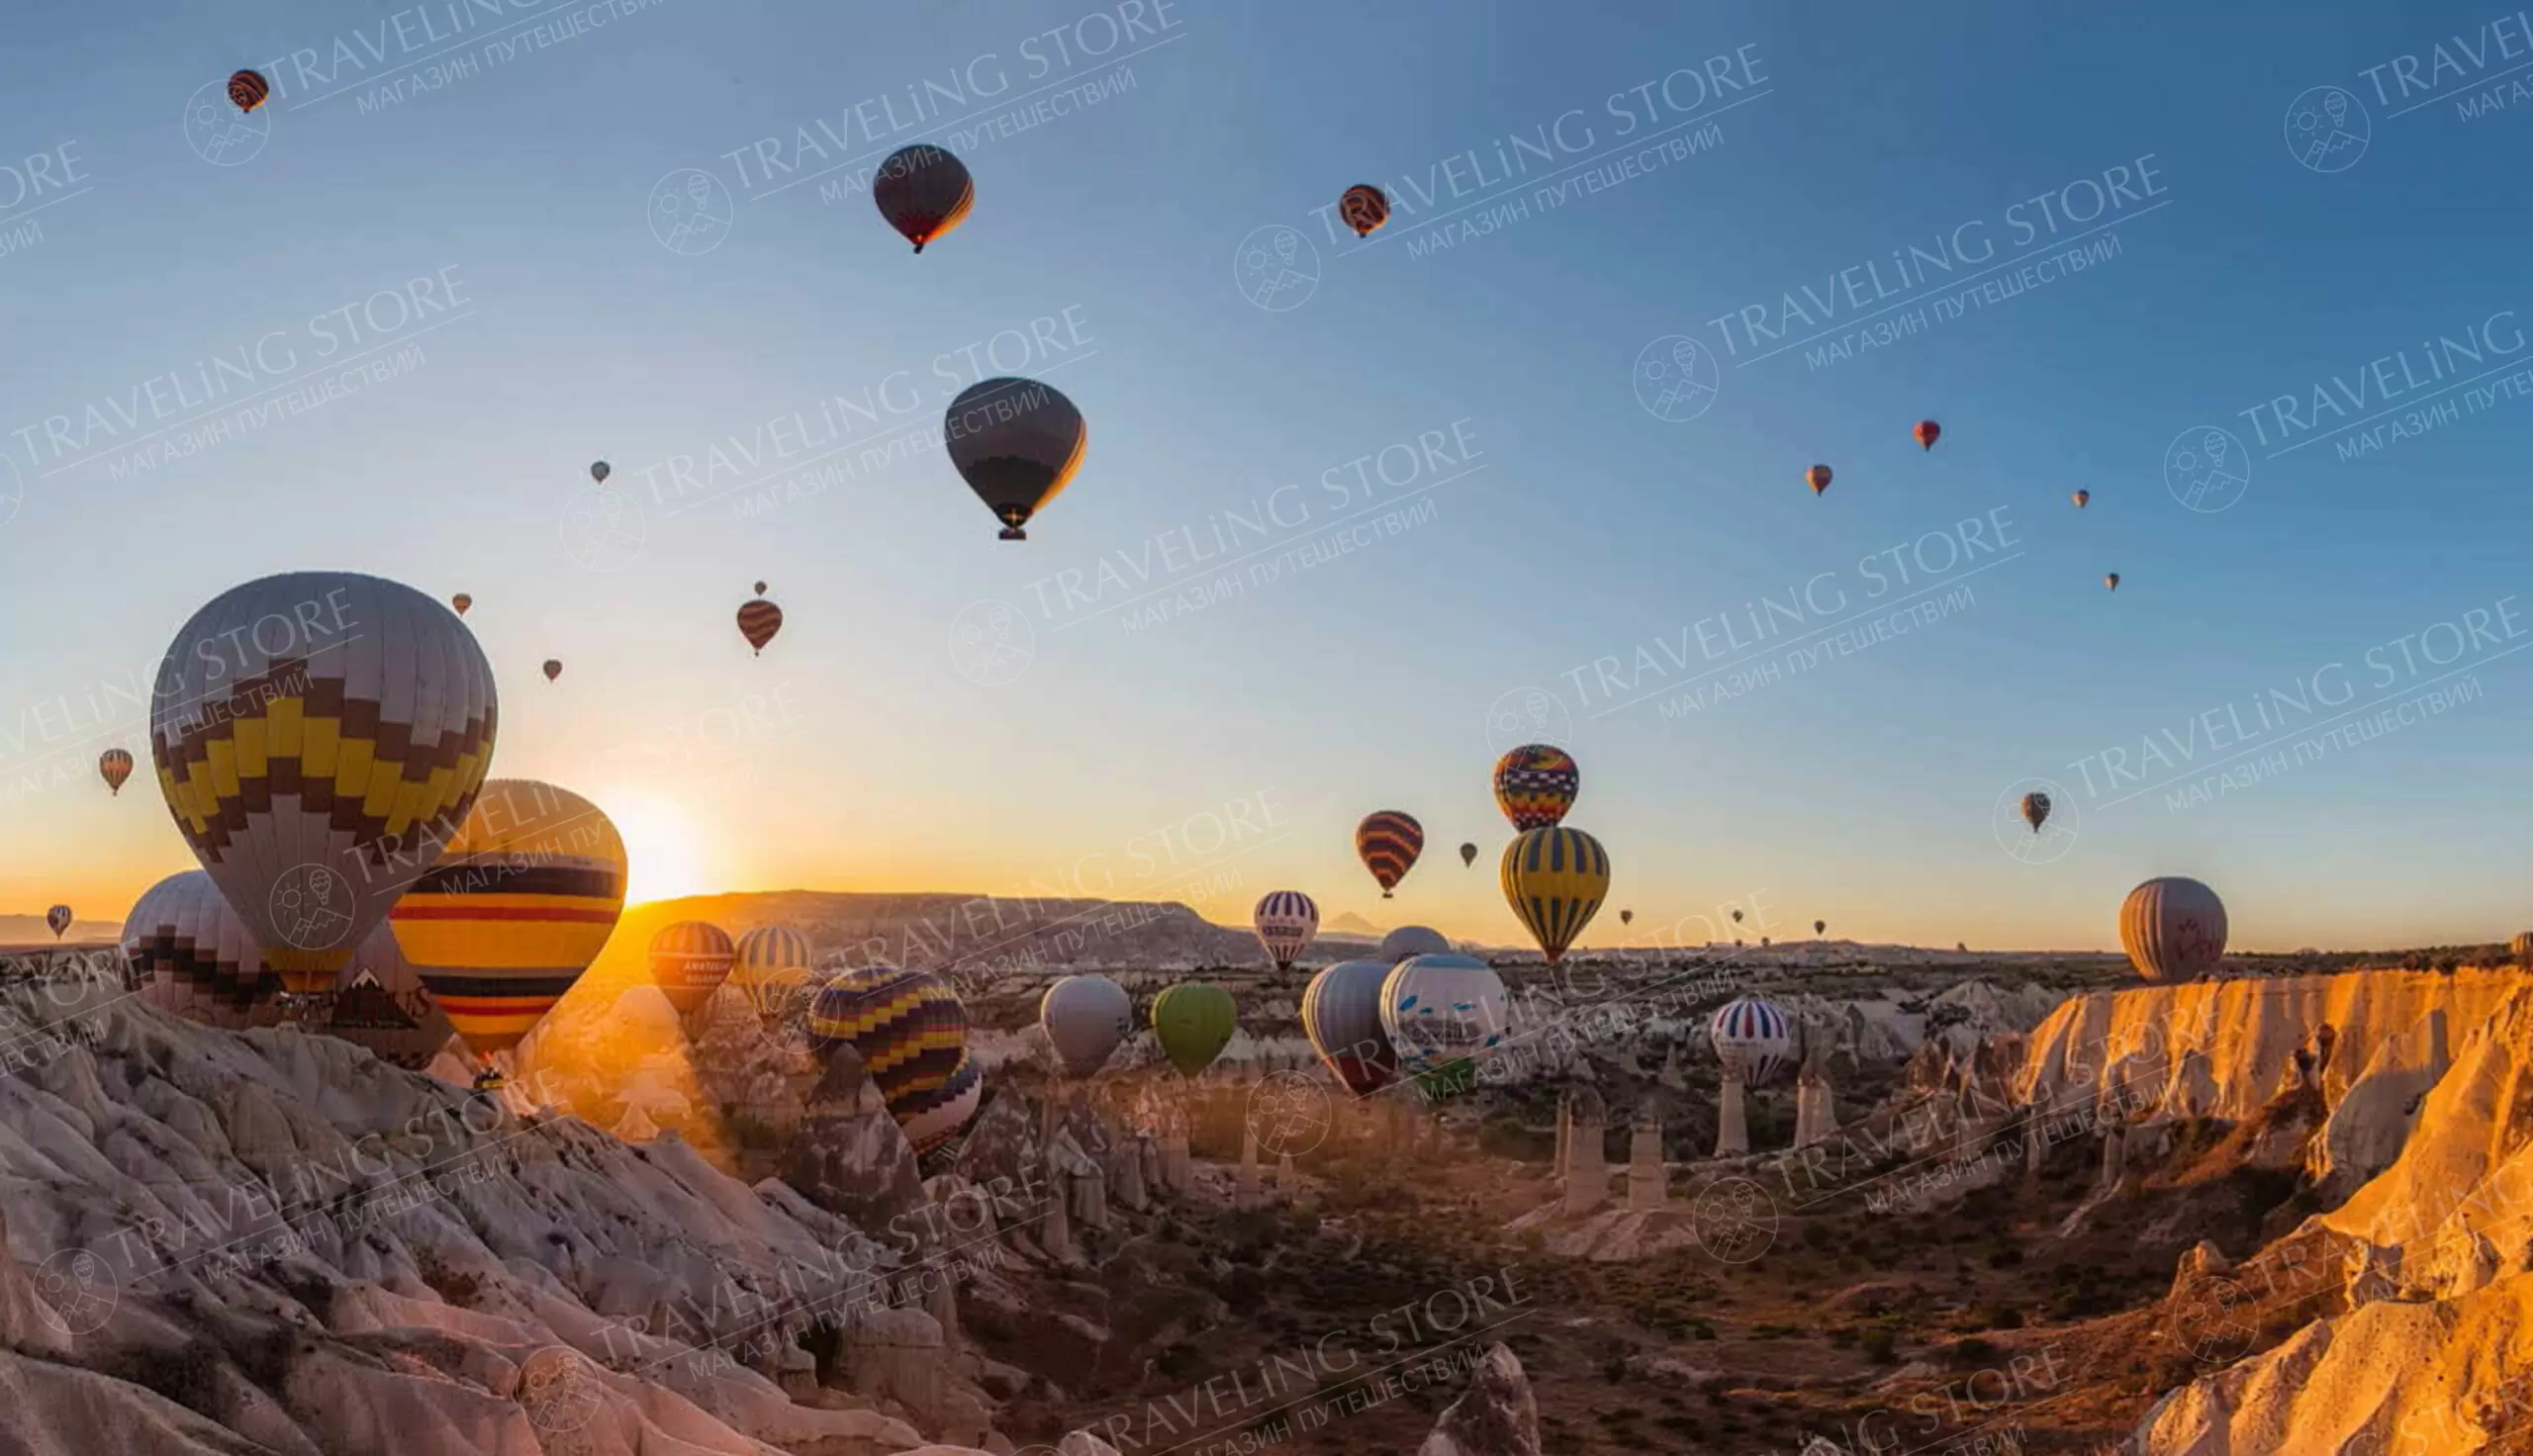 Cappadocia Tour from Side (two days)